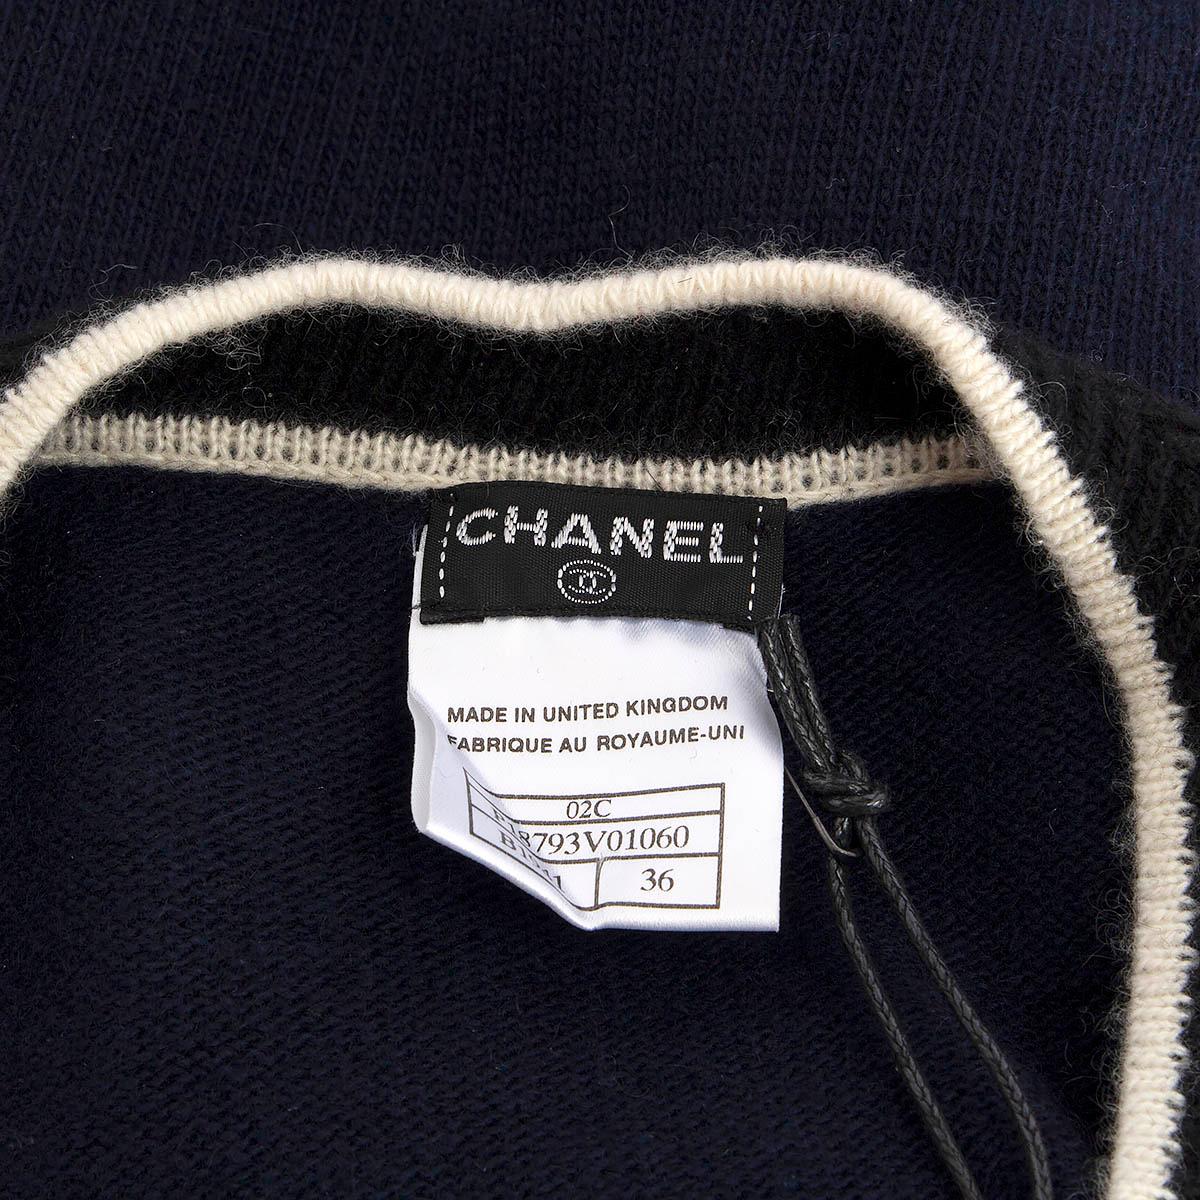 CHANEL navy cashmere 2002 02C CONTRAST TRIM Cardigan Sweater 36 XS For Sale 3